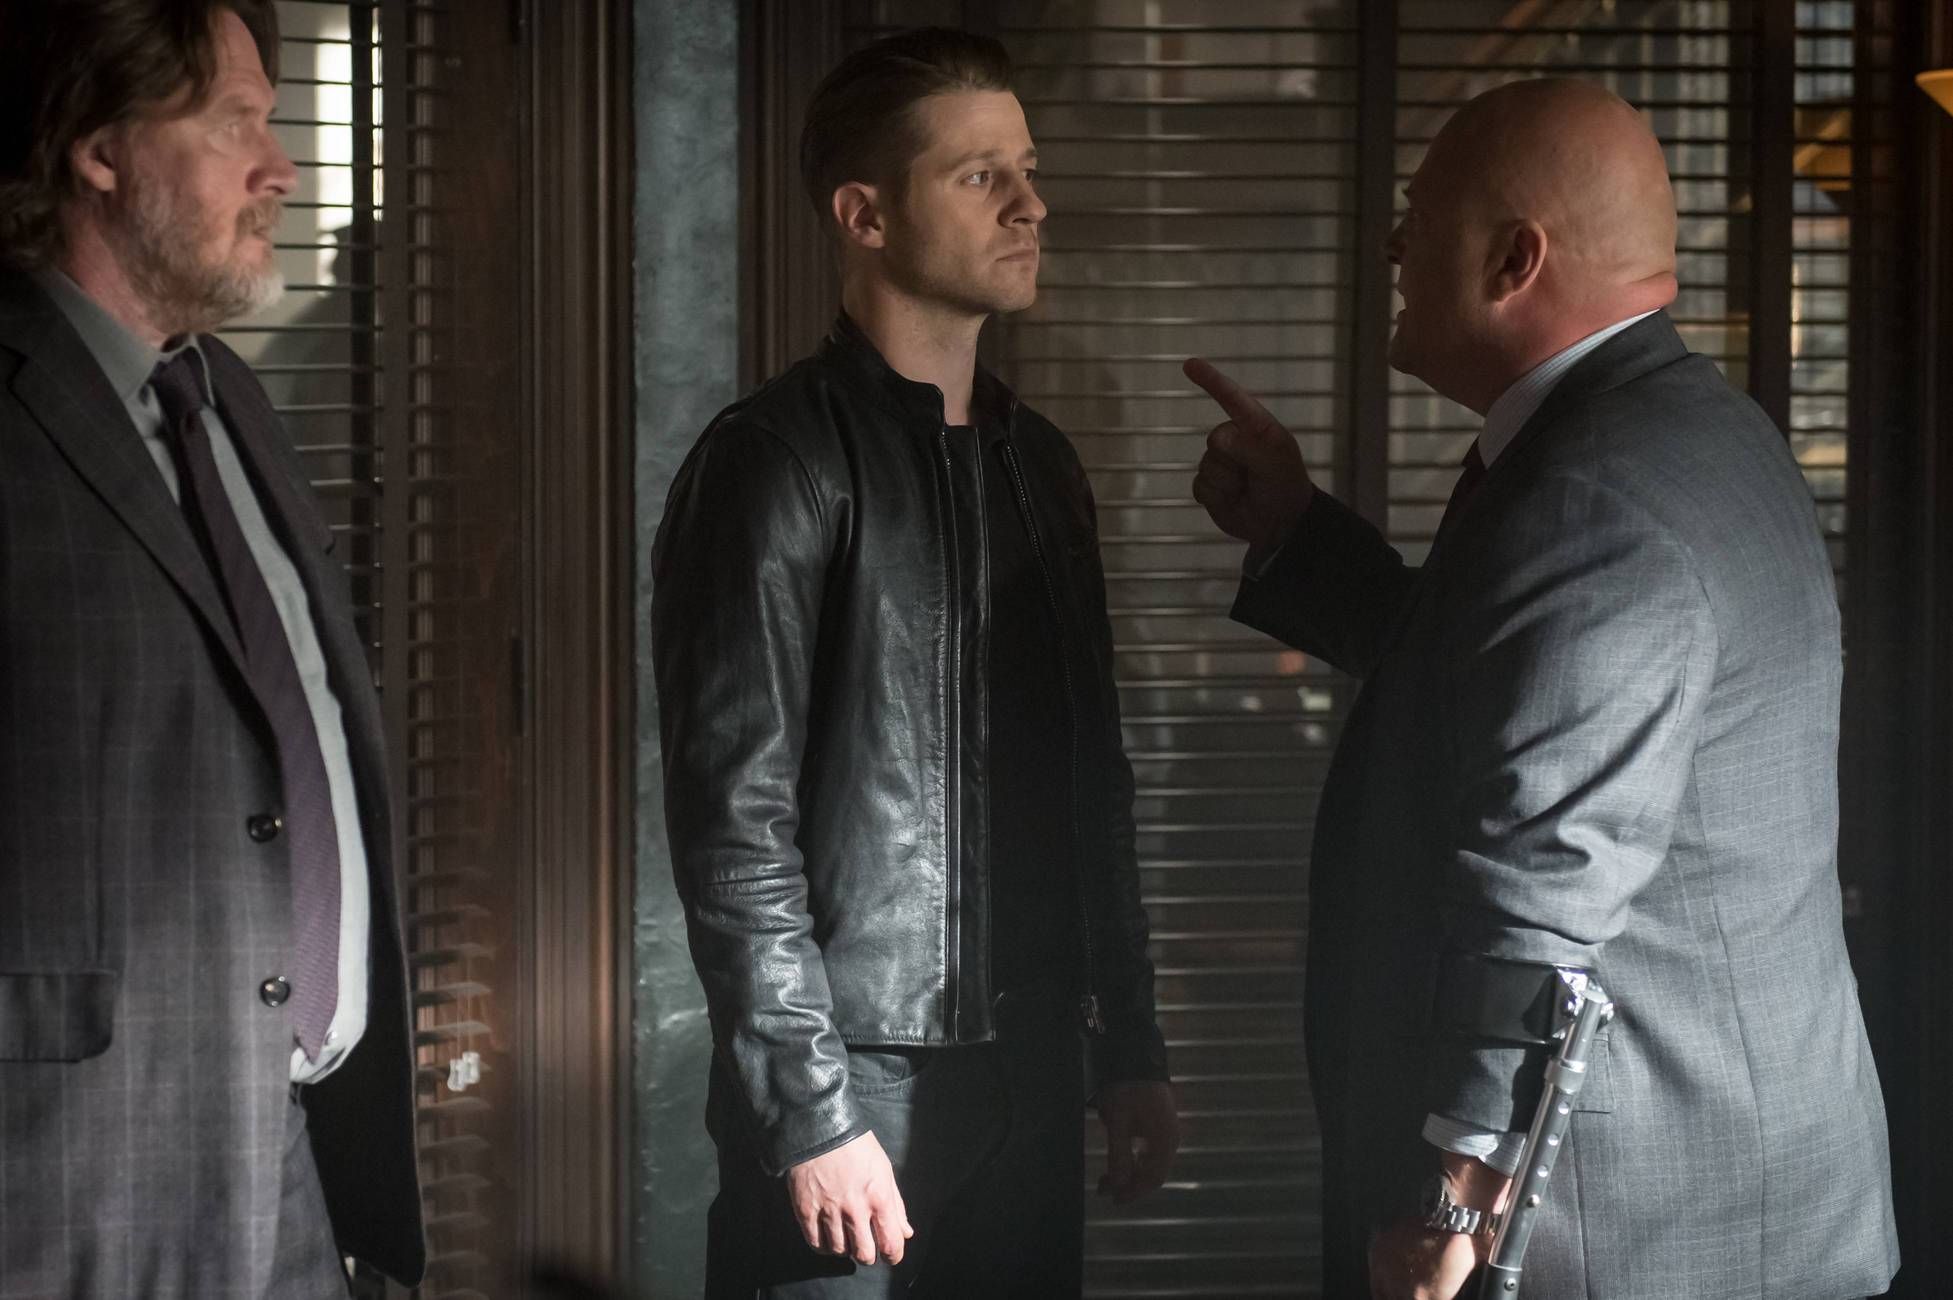 GOTHAM: L-R: Donal Logue, Ben McKenzie, and Michael Chiklis in the ÒMad City: Better to Reign in HellÉÓ season premiere episode of GOTHAM airing airing Monday, Sept. 19 (8:00-9:01 PM ET/PT) on FOX. ©2015 Fox Broadcasting Co. Cr: Jeff Neumann/FOX.